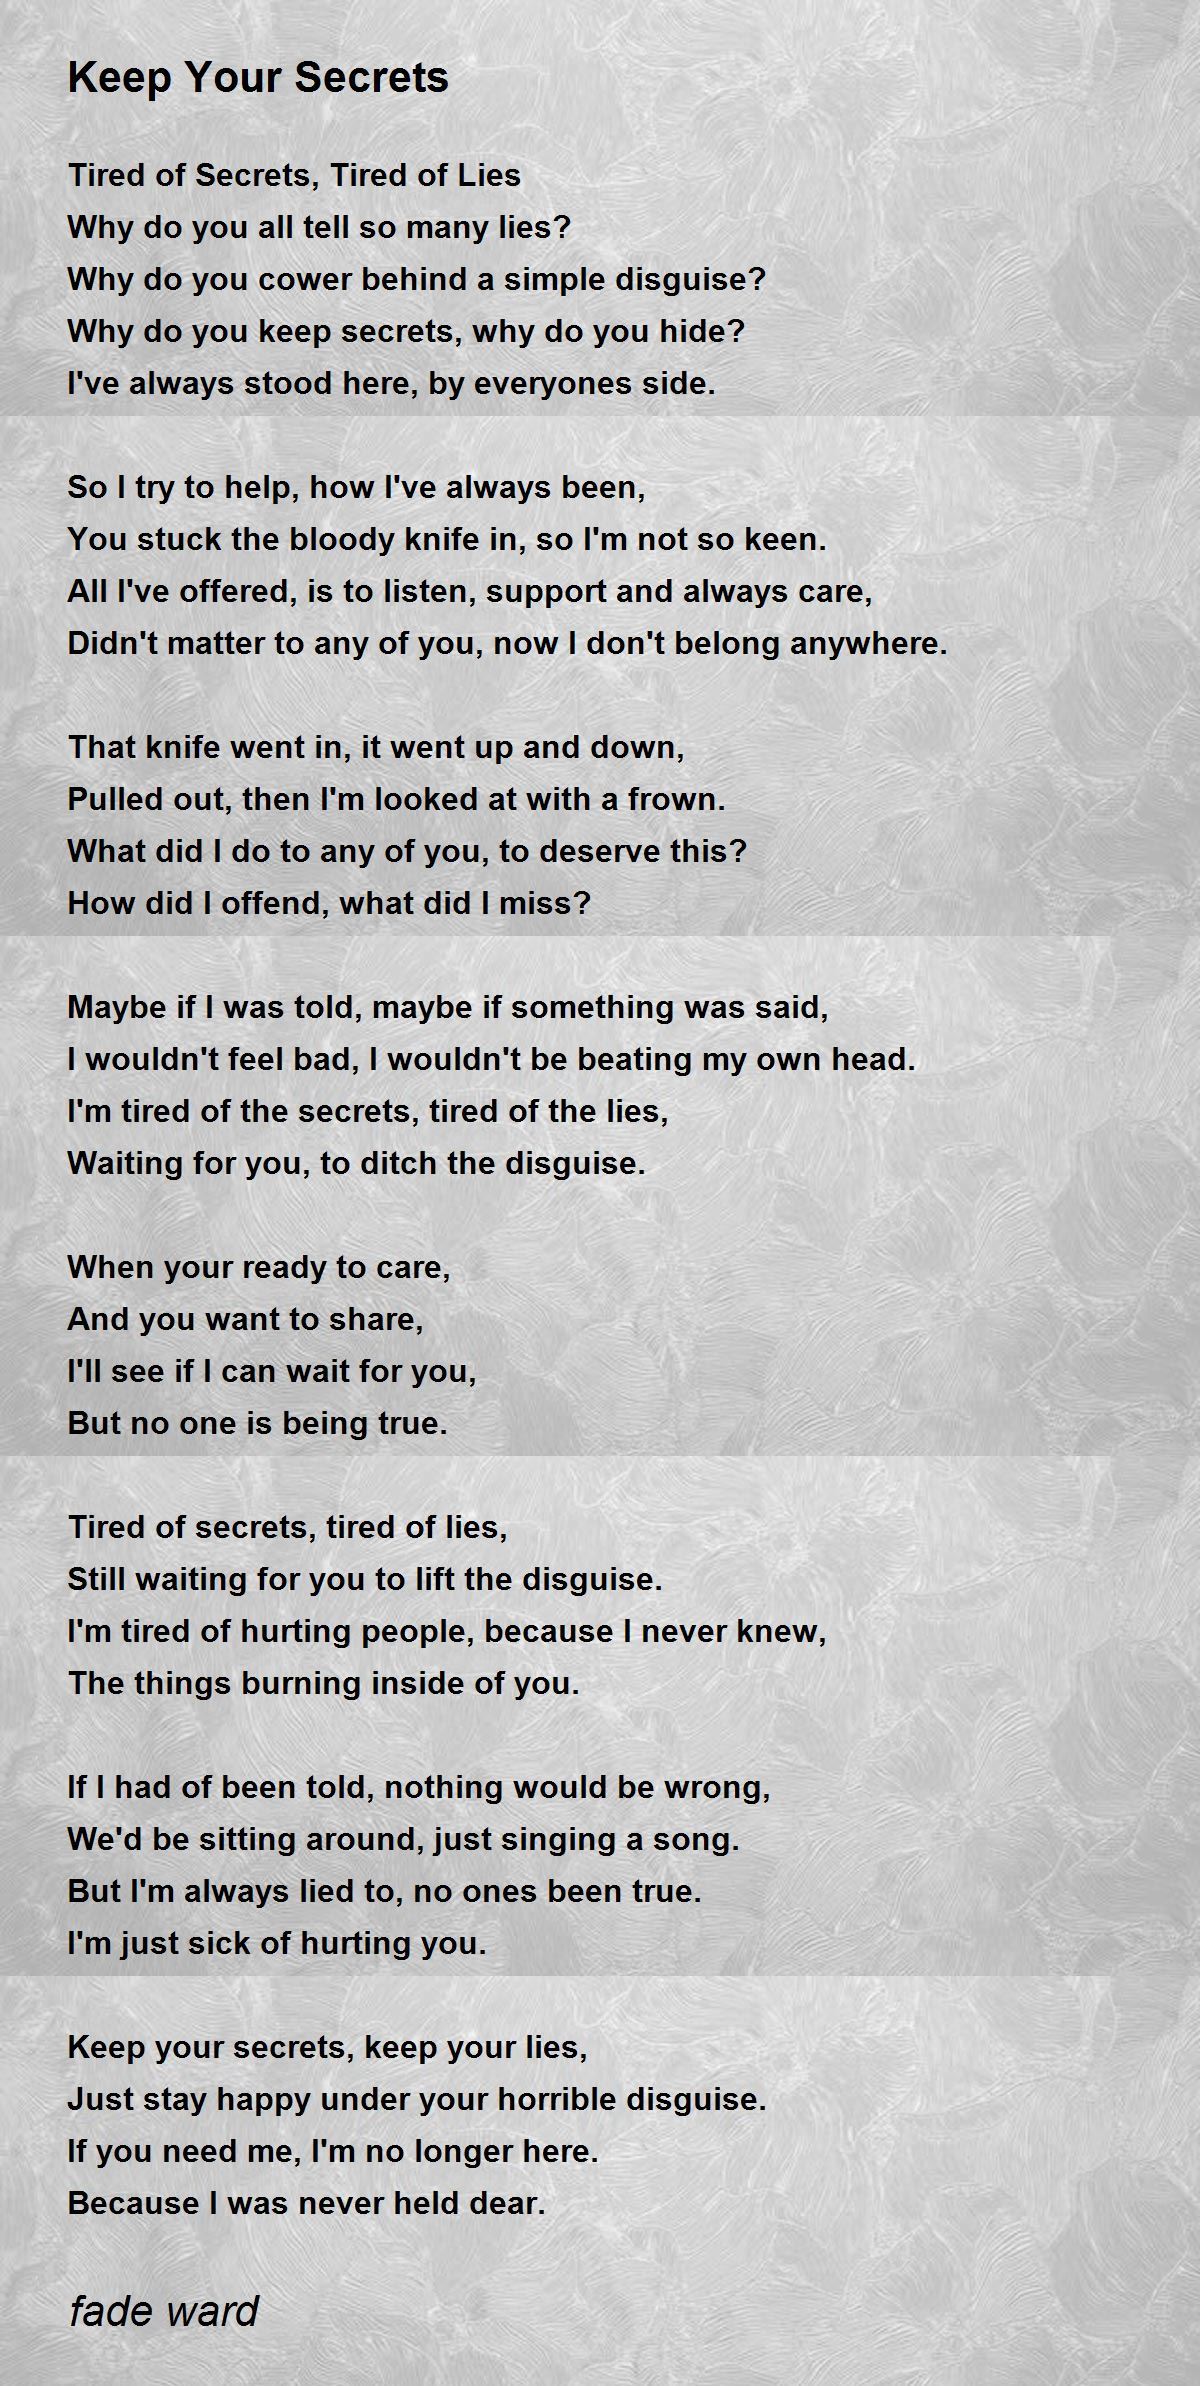 Poems about lies and secrets